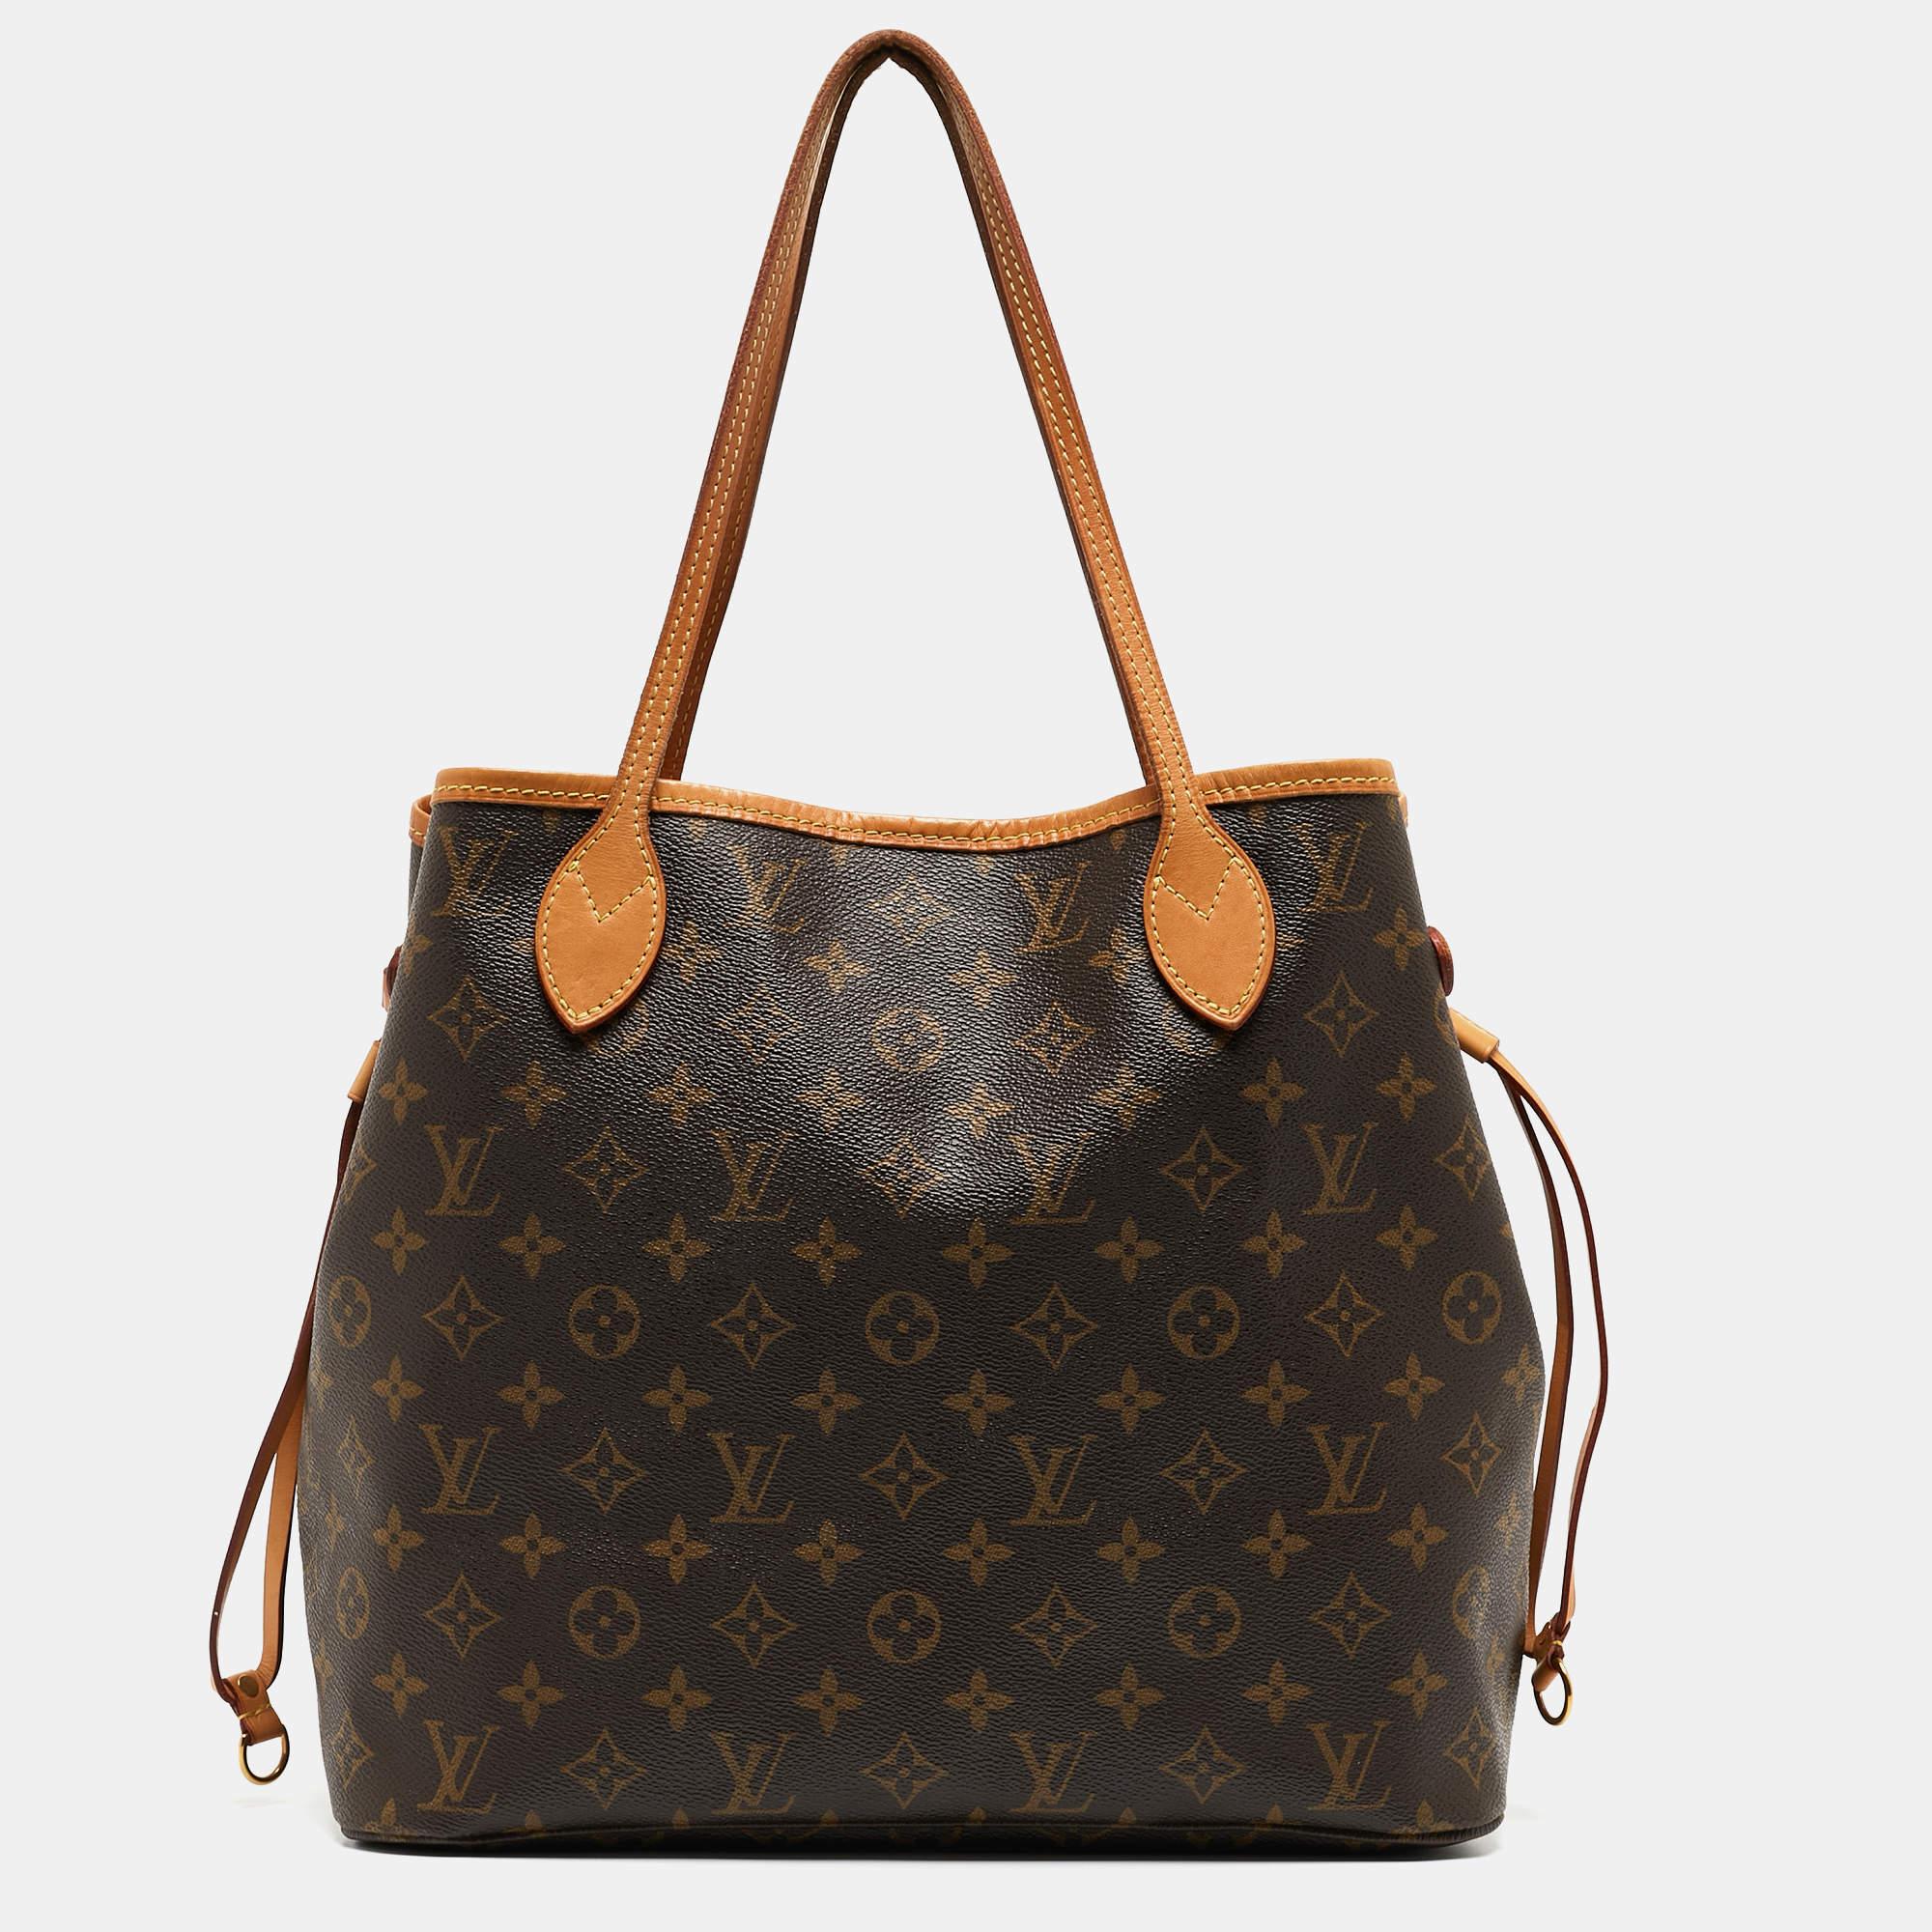 Louis Vuitton’s Neverfull was first introduced in 2007, and even today it is a popular design. Crafted from Monogram coated canvas, this Neverfull is luxurious. The bag has drawstrings on the sides, a spacious canvas interior that can house all your